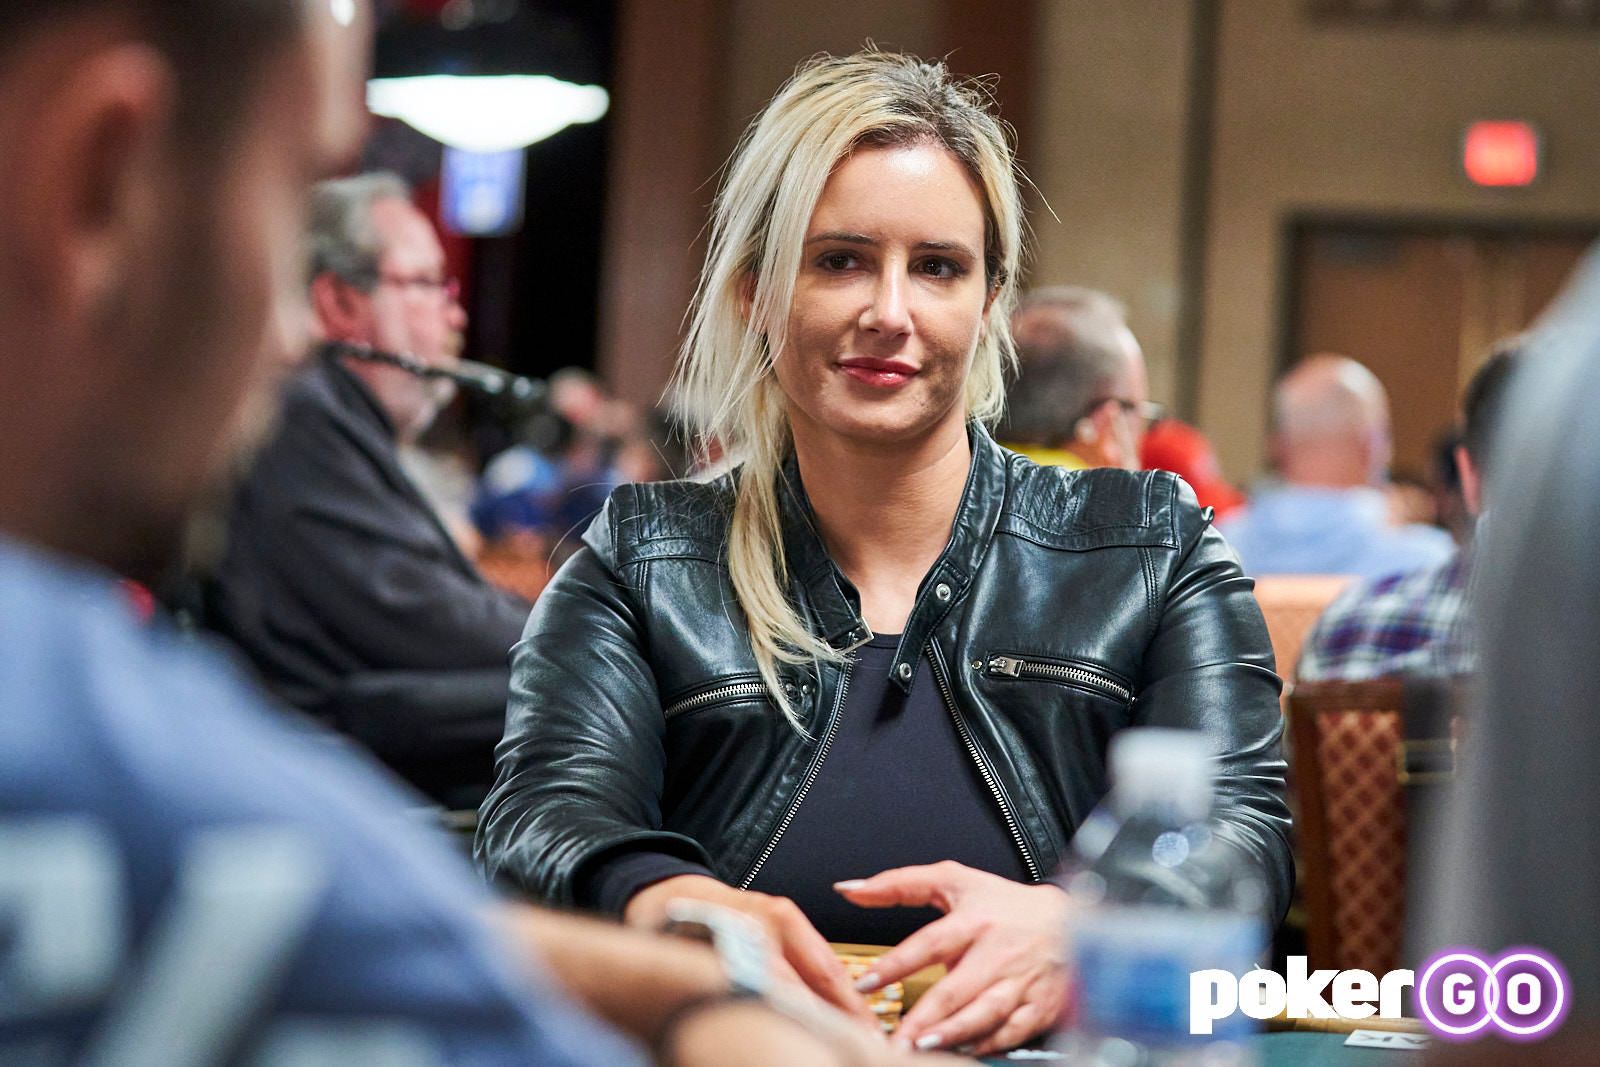 Could Vanessa Kade Become PokerStars' Next Team Pro? Visualization techniques played a key role in Kade's preparations before taking down PokerStars' Sunday Million last year.